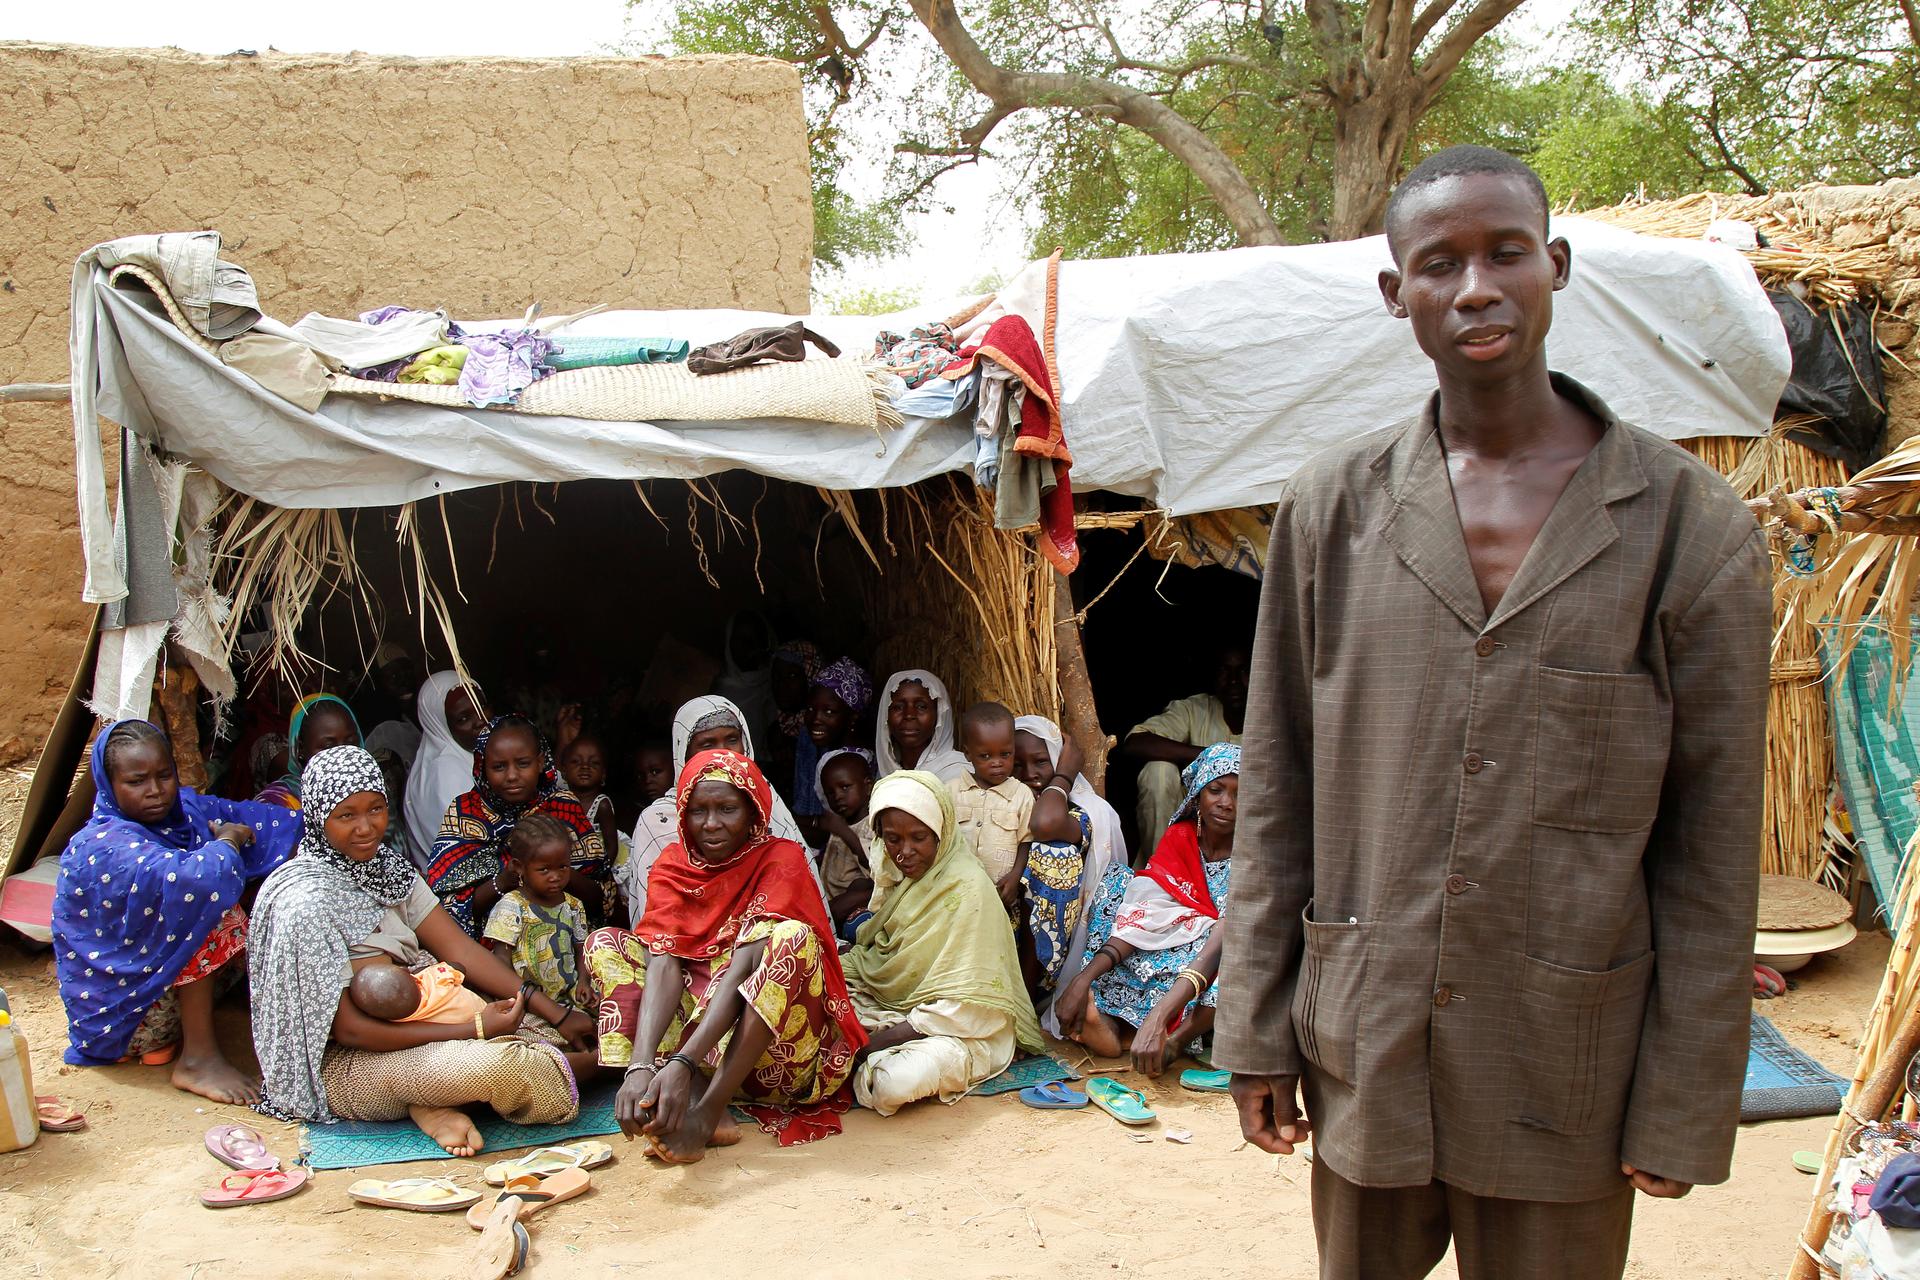 Aba Ali, a Nigerian refugee who fled from his village in northeastern Nigeria